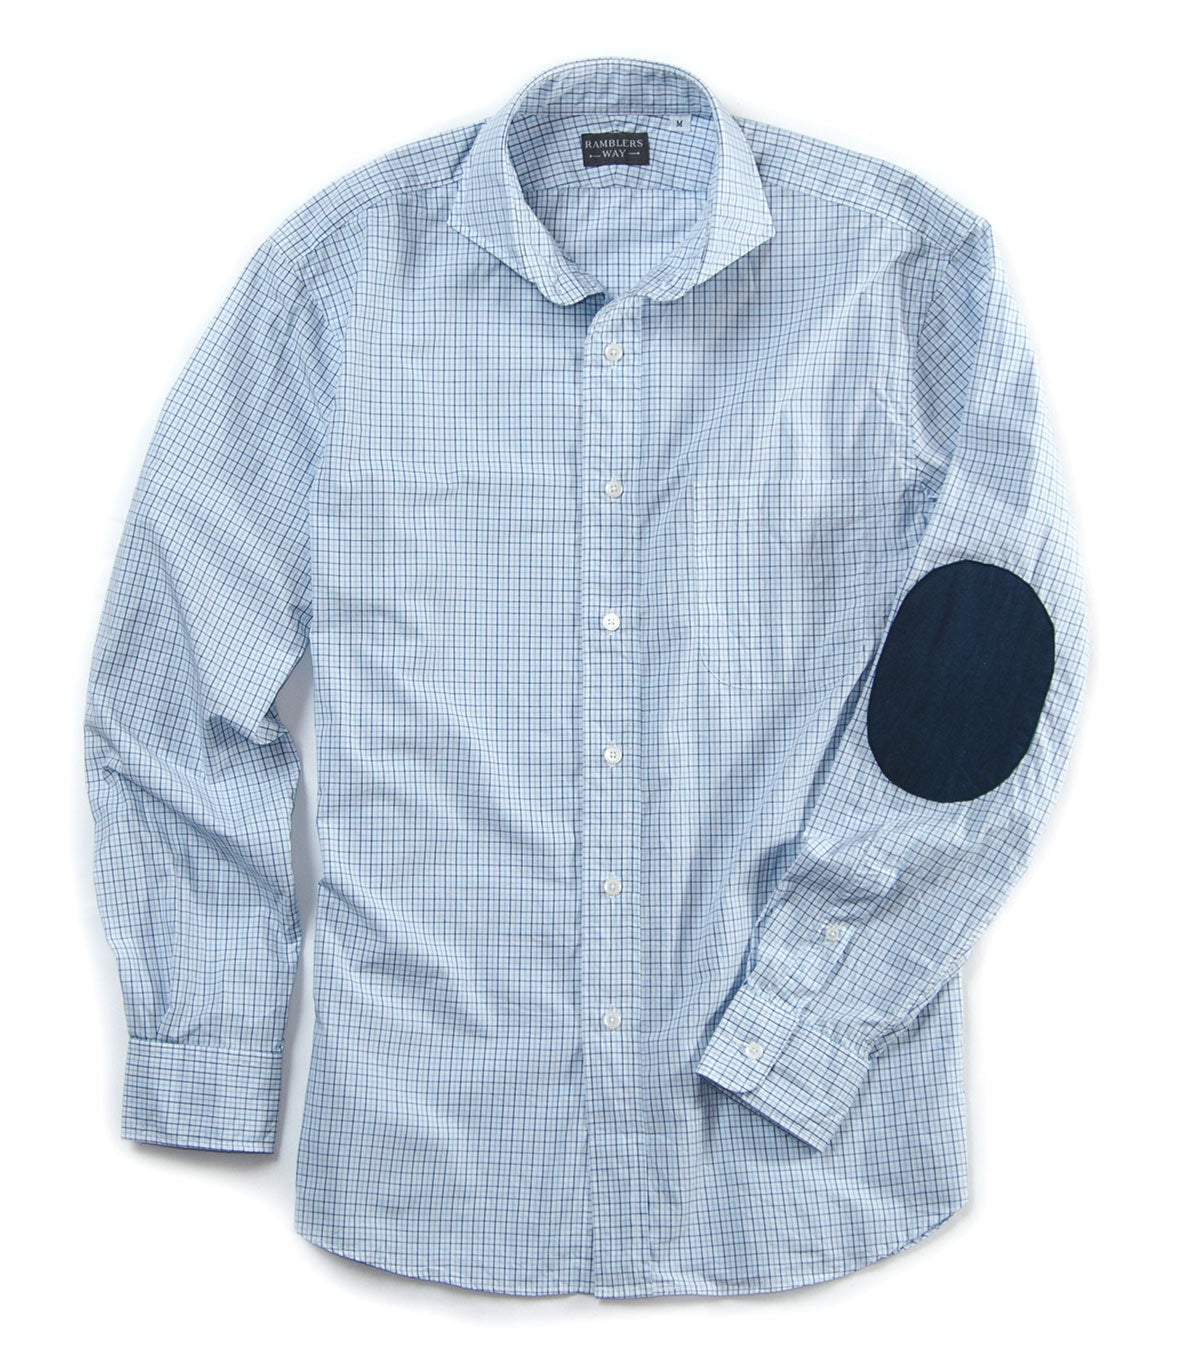 Wales Cotton Shirt w/ Elbow Patches Made in USA | RAMBLERS WAY